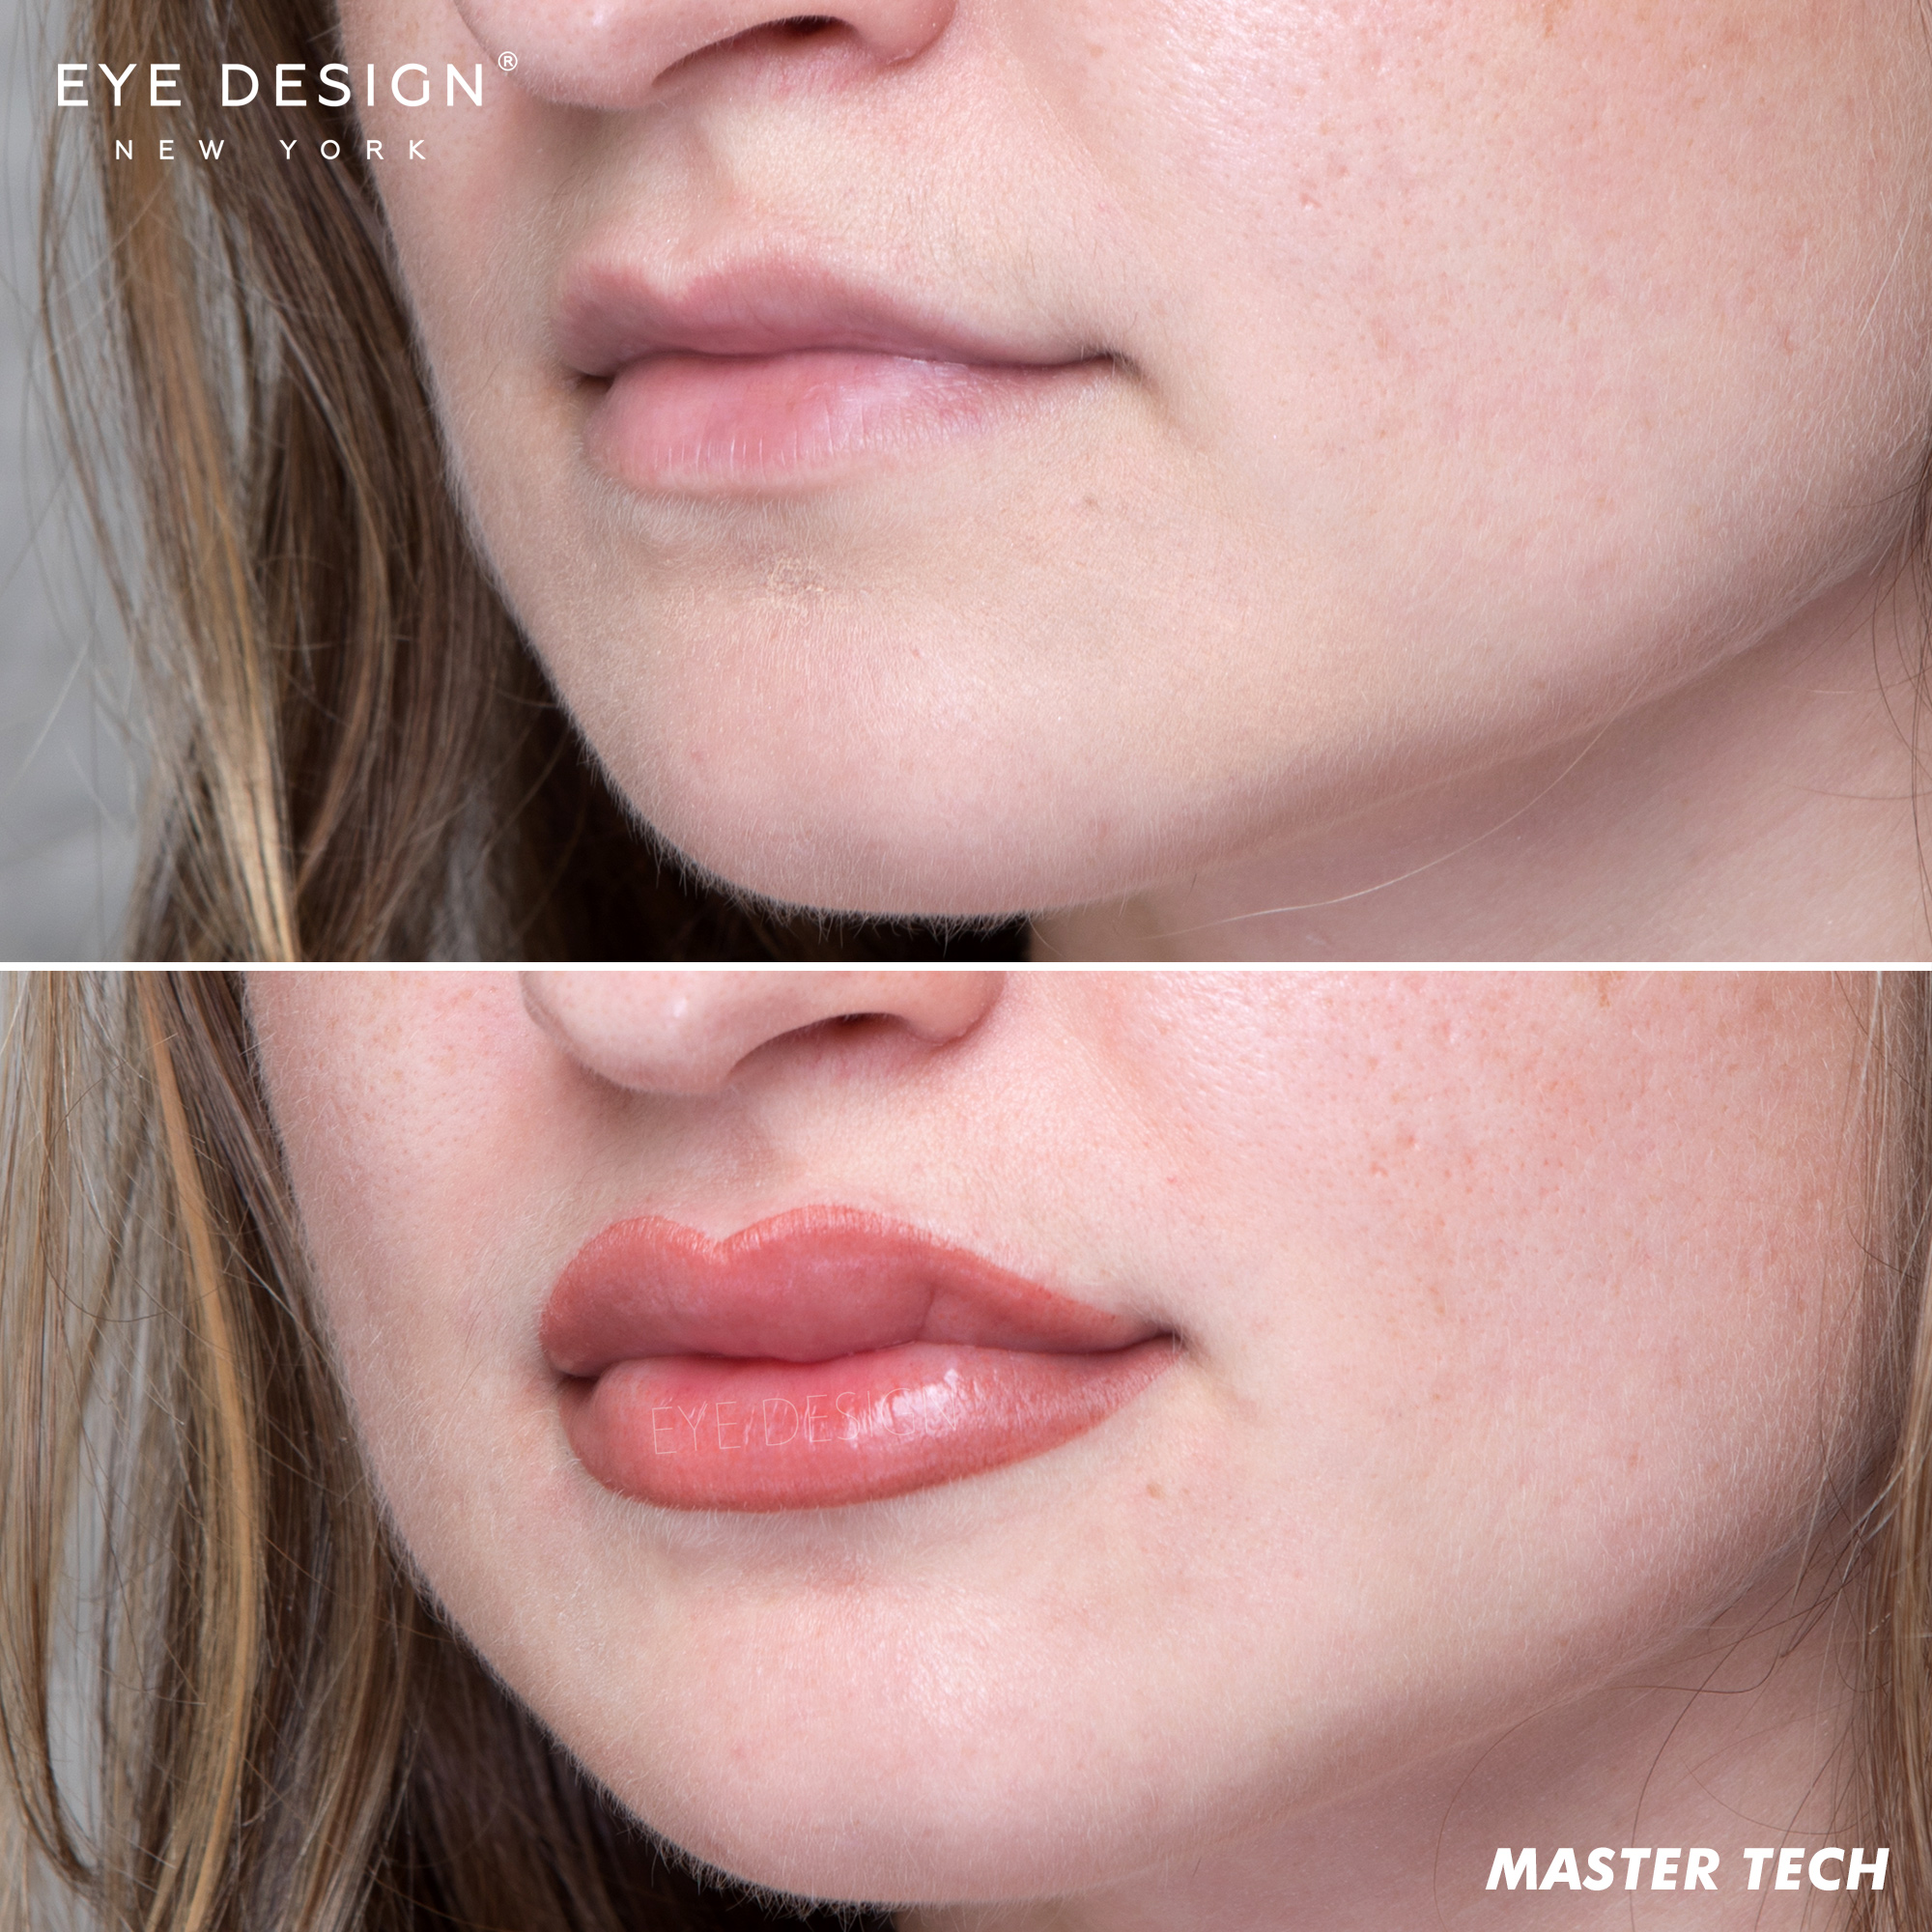 Treat your lips to semi-permanent makeup at Eye Design